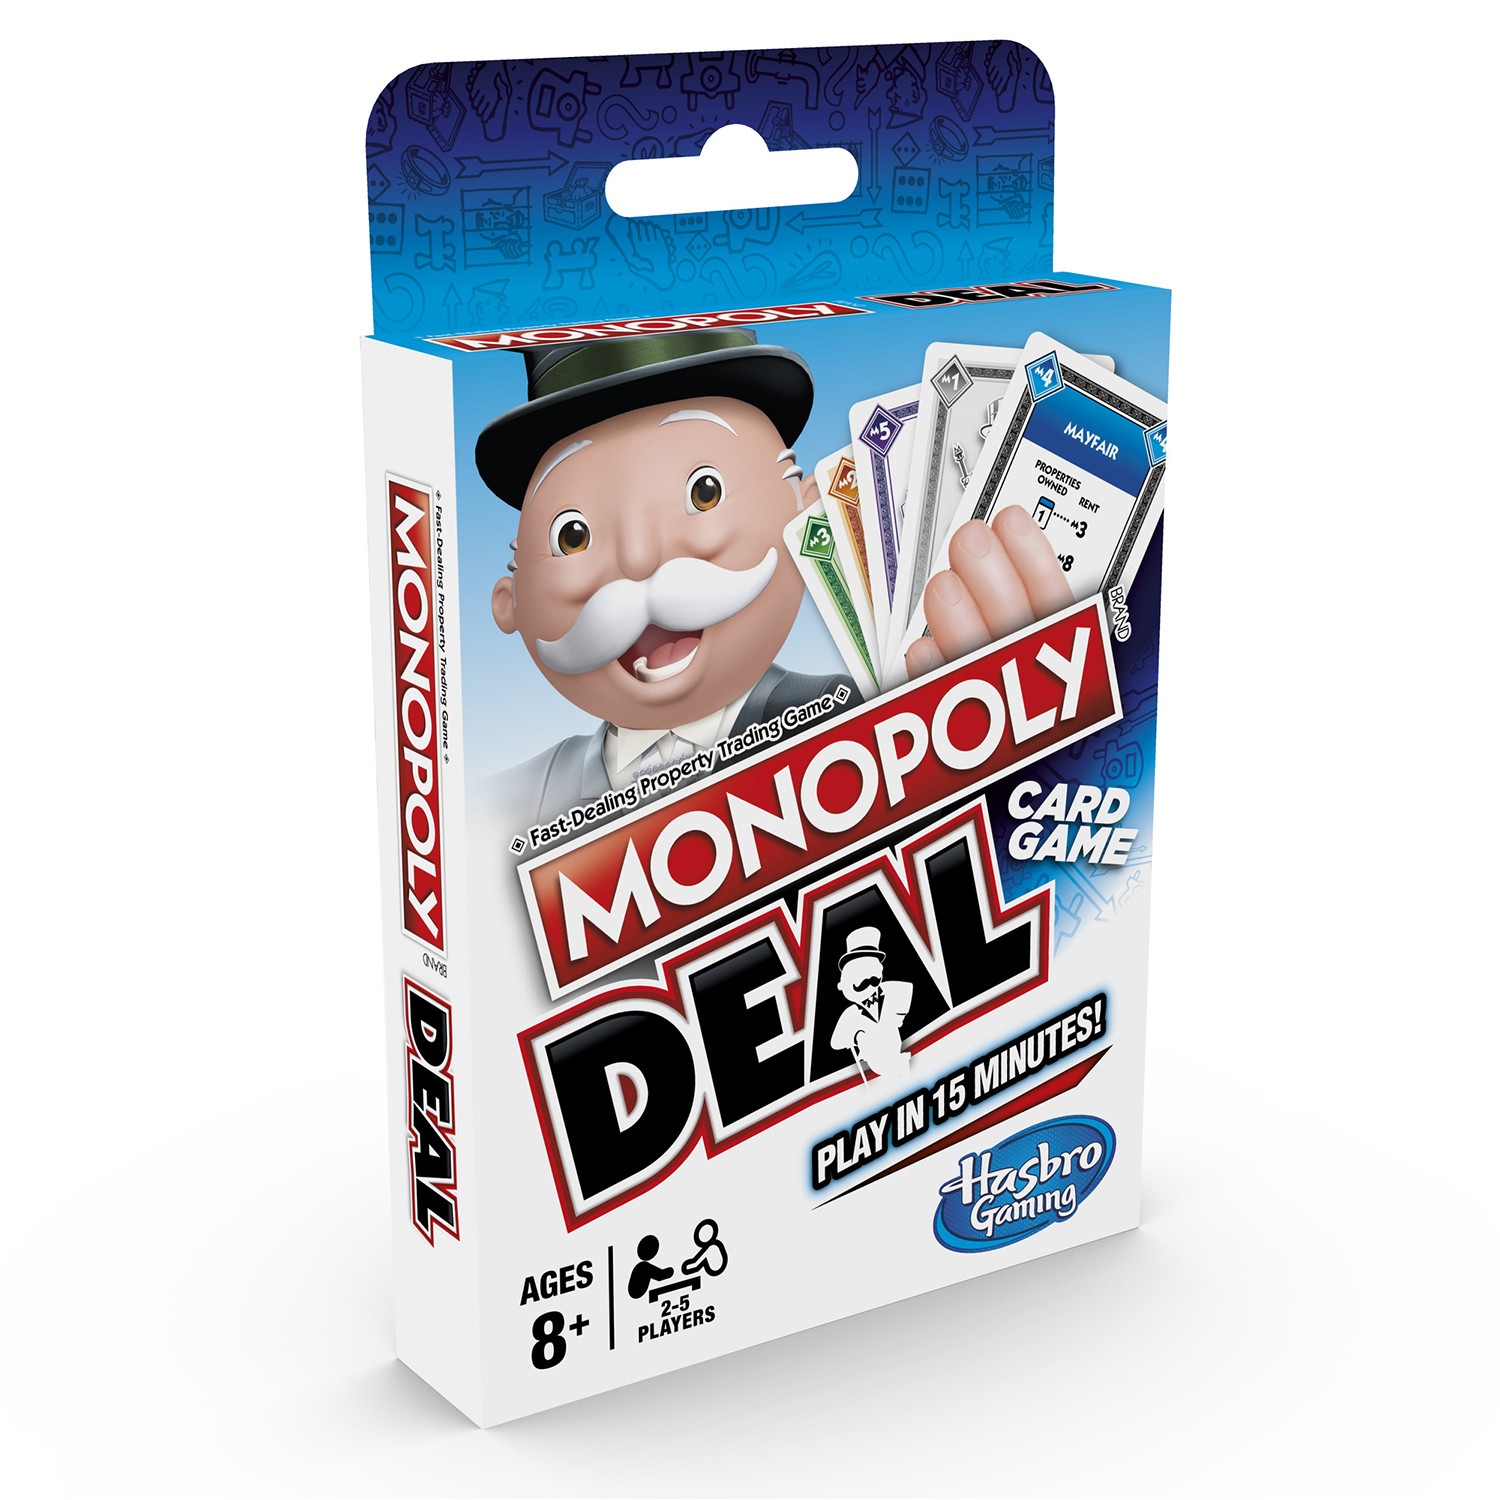 Monopoly Deal Image 1